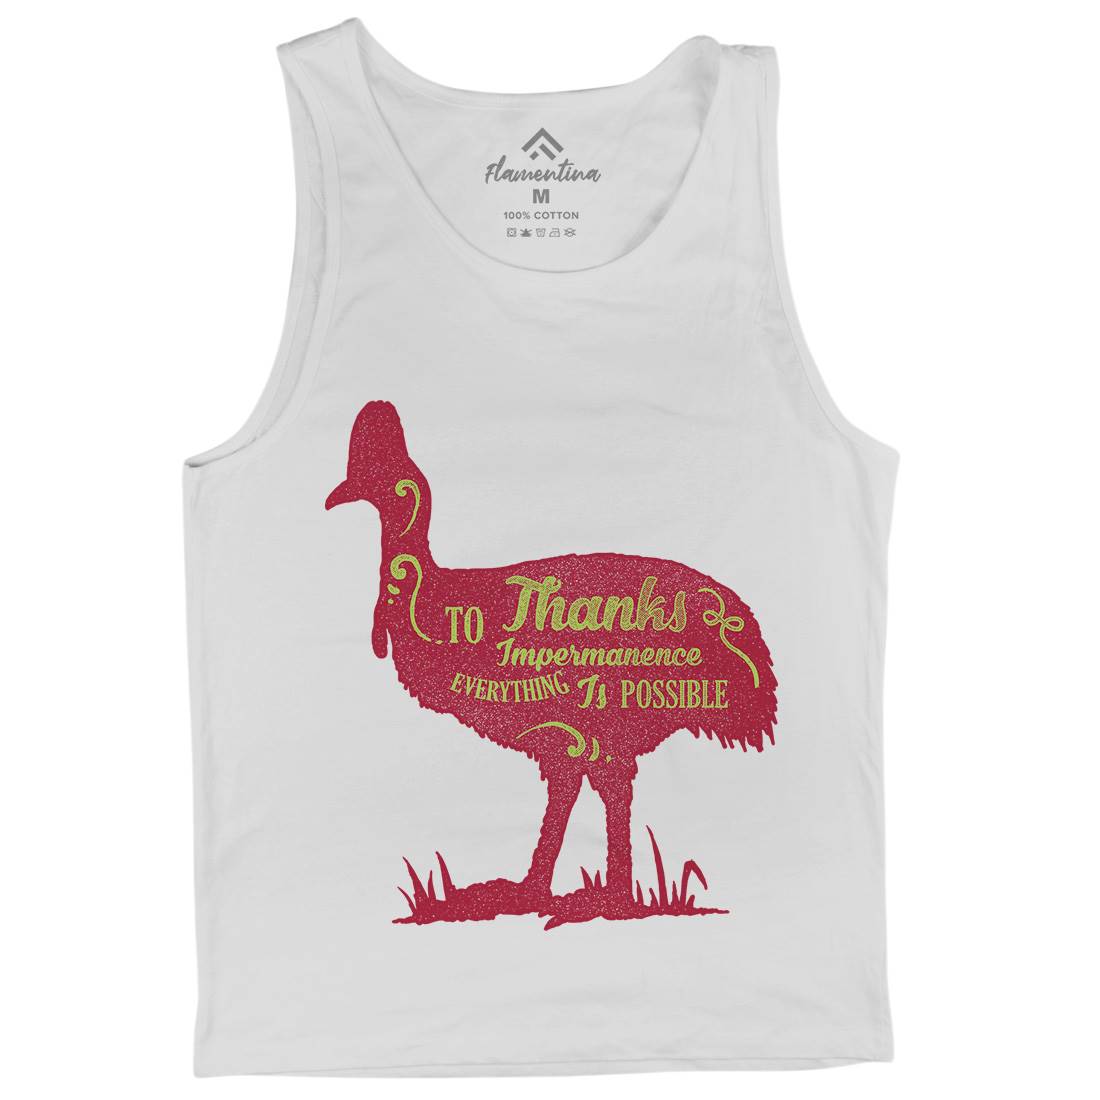 Thanks To Impermanence Mens Tank Top Vest Quotes A374